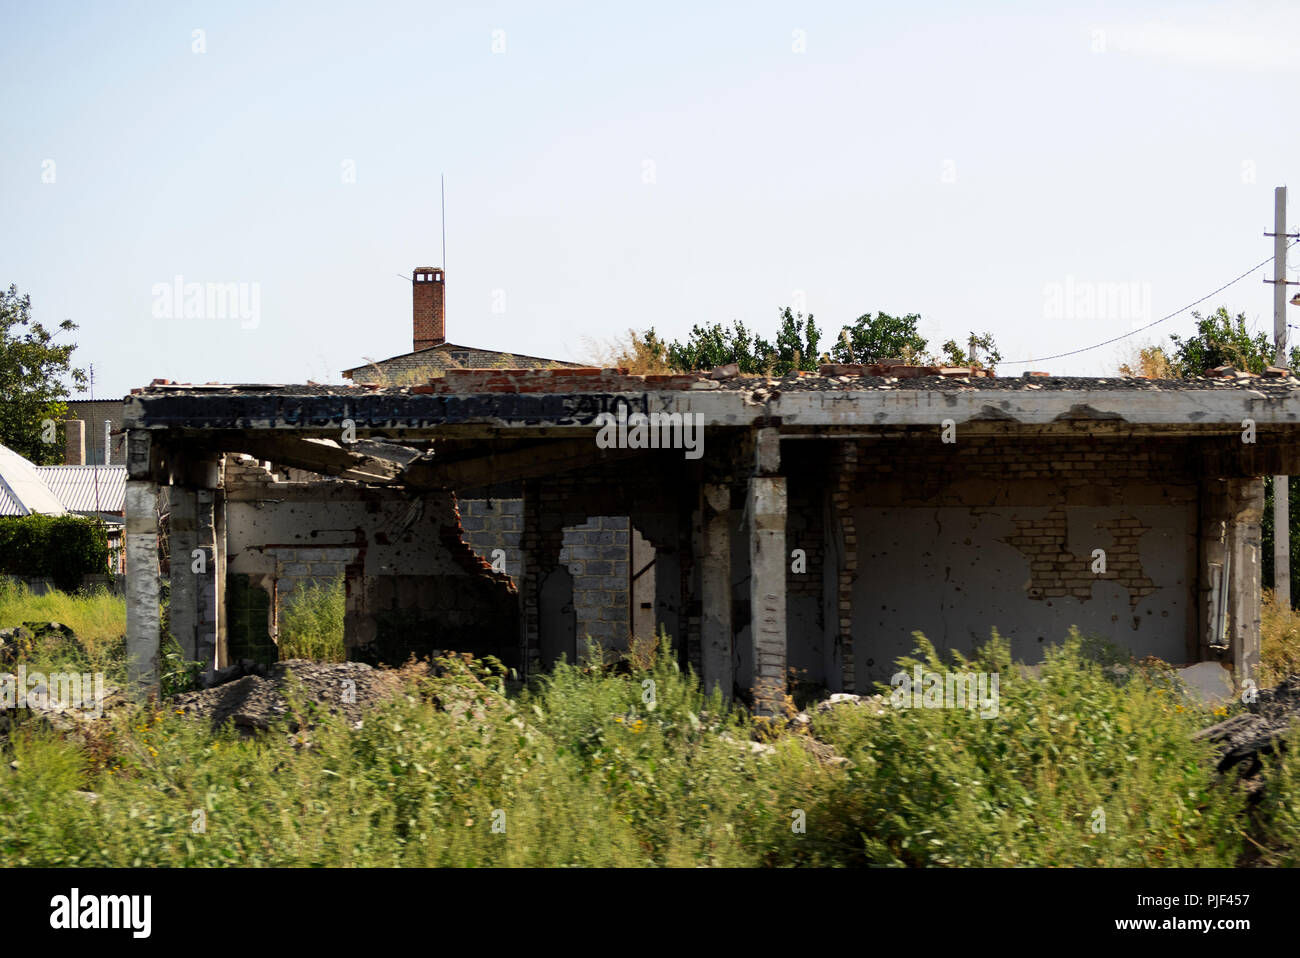 Donbass, Ukraine. 6th Sept 2018. The industrial building destroyed during the battles for the city. — In April 2014, a group of terrorists, led by Russian FSB collaborator Igor Strelkov, captured Slovyansk. That began the Russian invasion of Donbass. In early July of the same year, the Armed Forces of Ukraine drove pro-Russian armed formations out of the city. Now, after four years, the city is actively developing. However, on its outskirts there were many buildings destroyed during the fighting. Credit: Igor Golovnov/Alamy Live News Stock Photo